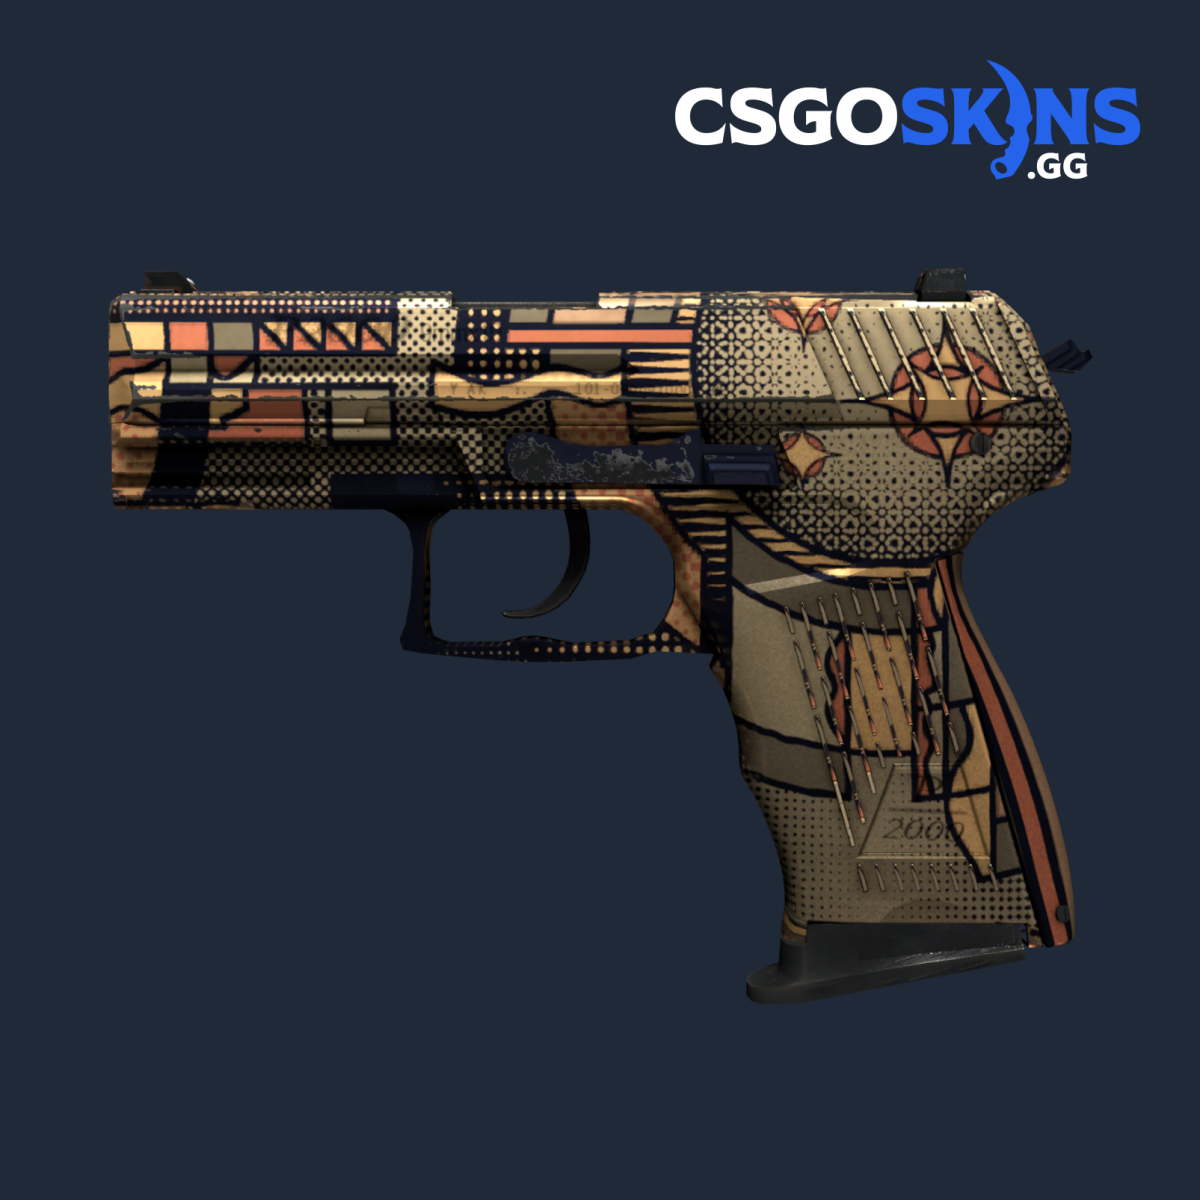 P2000 Ivory cs go skin download the last version for mac